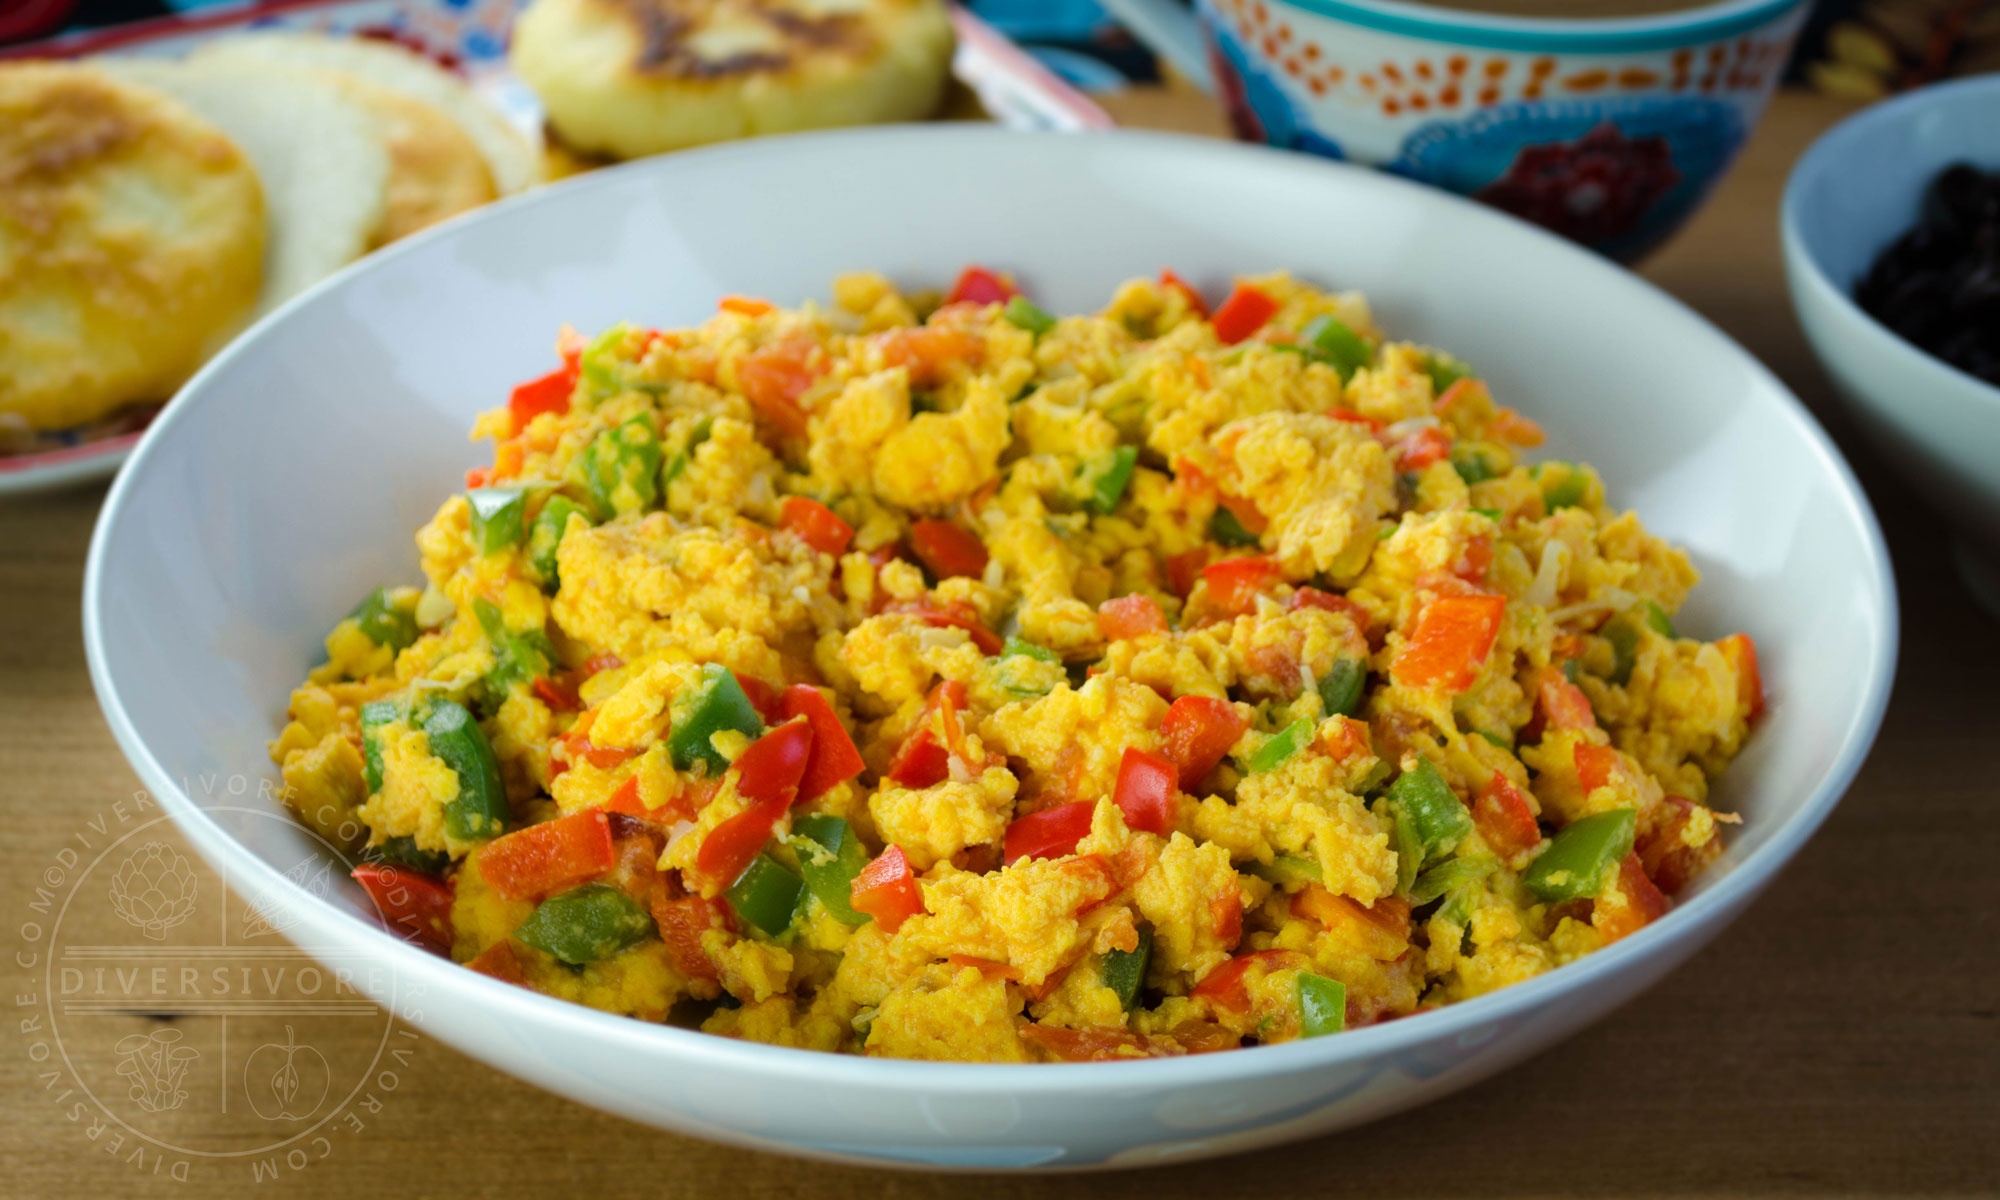 Perico - Colombian/Venezuelan scrambled eggs with peppers, tomatoes, and onions, served in a shallow white bowl